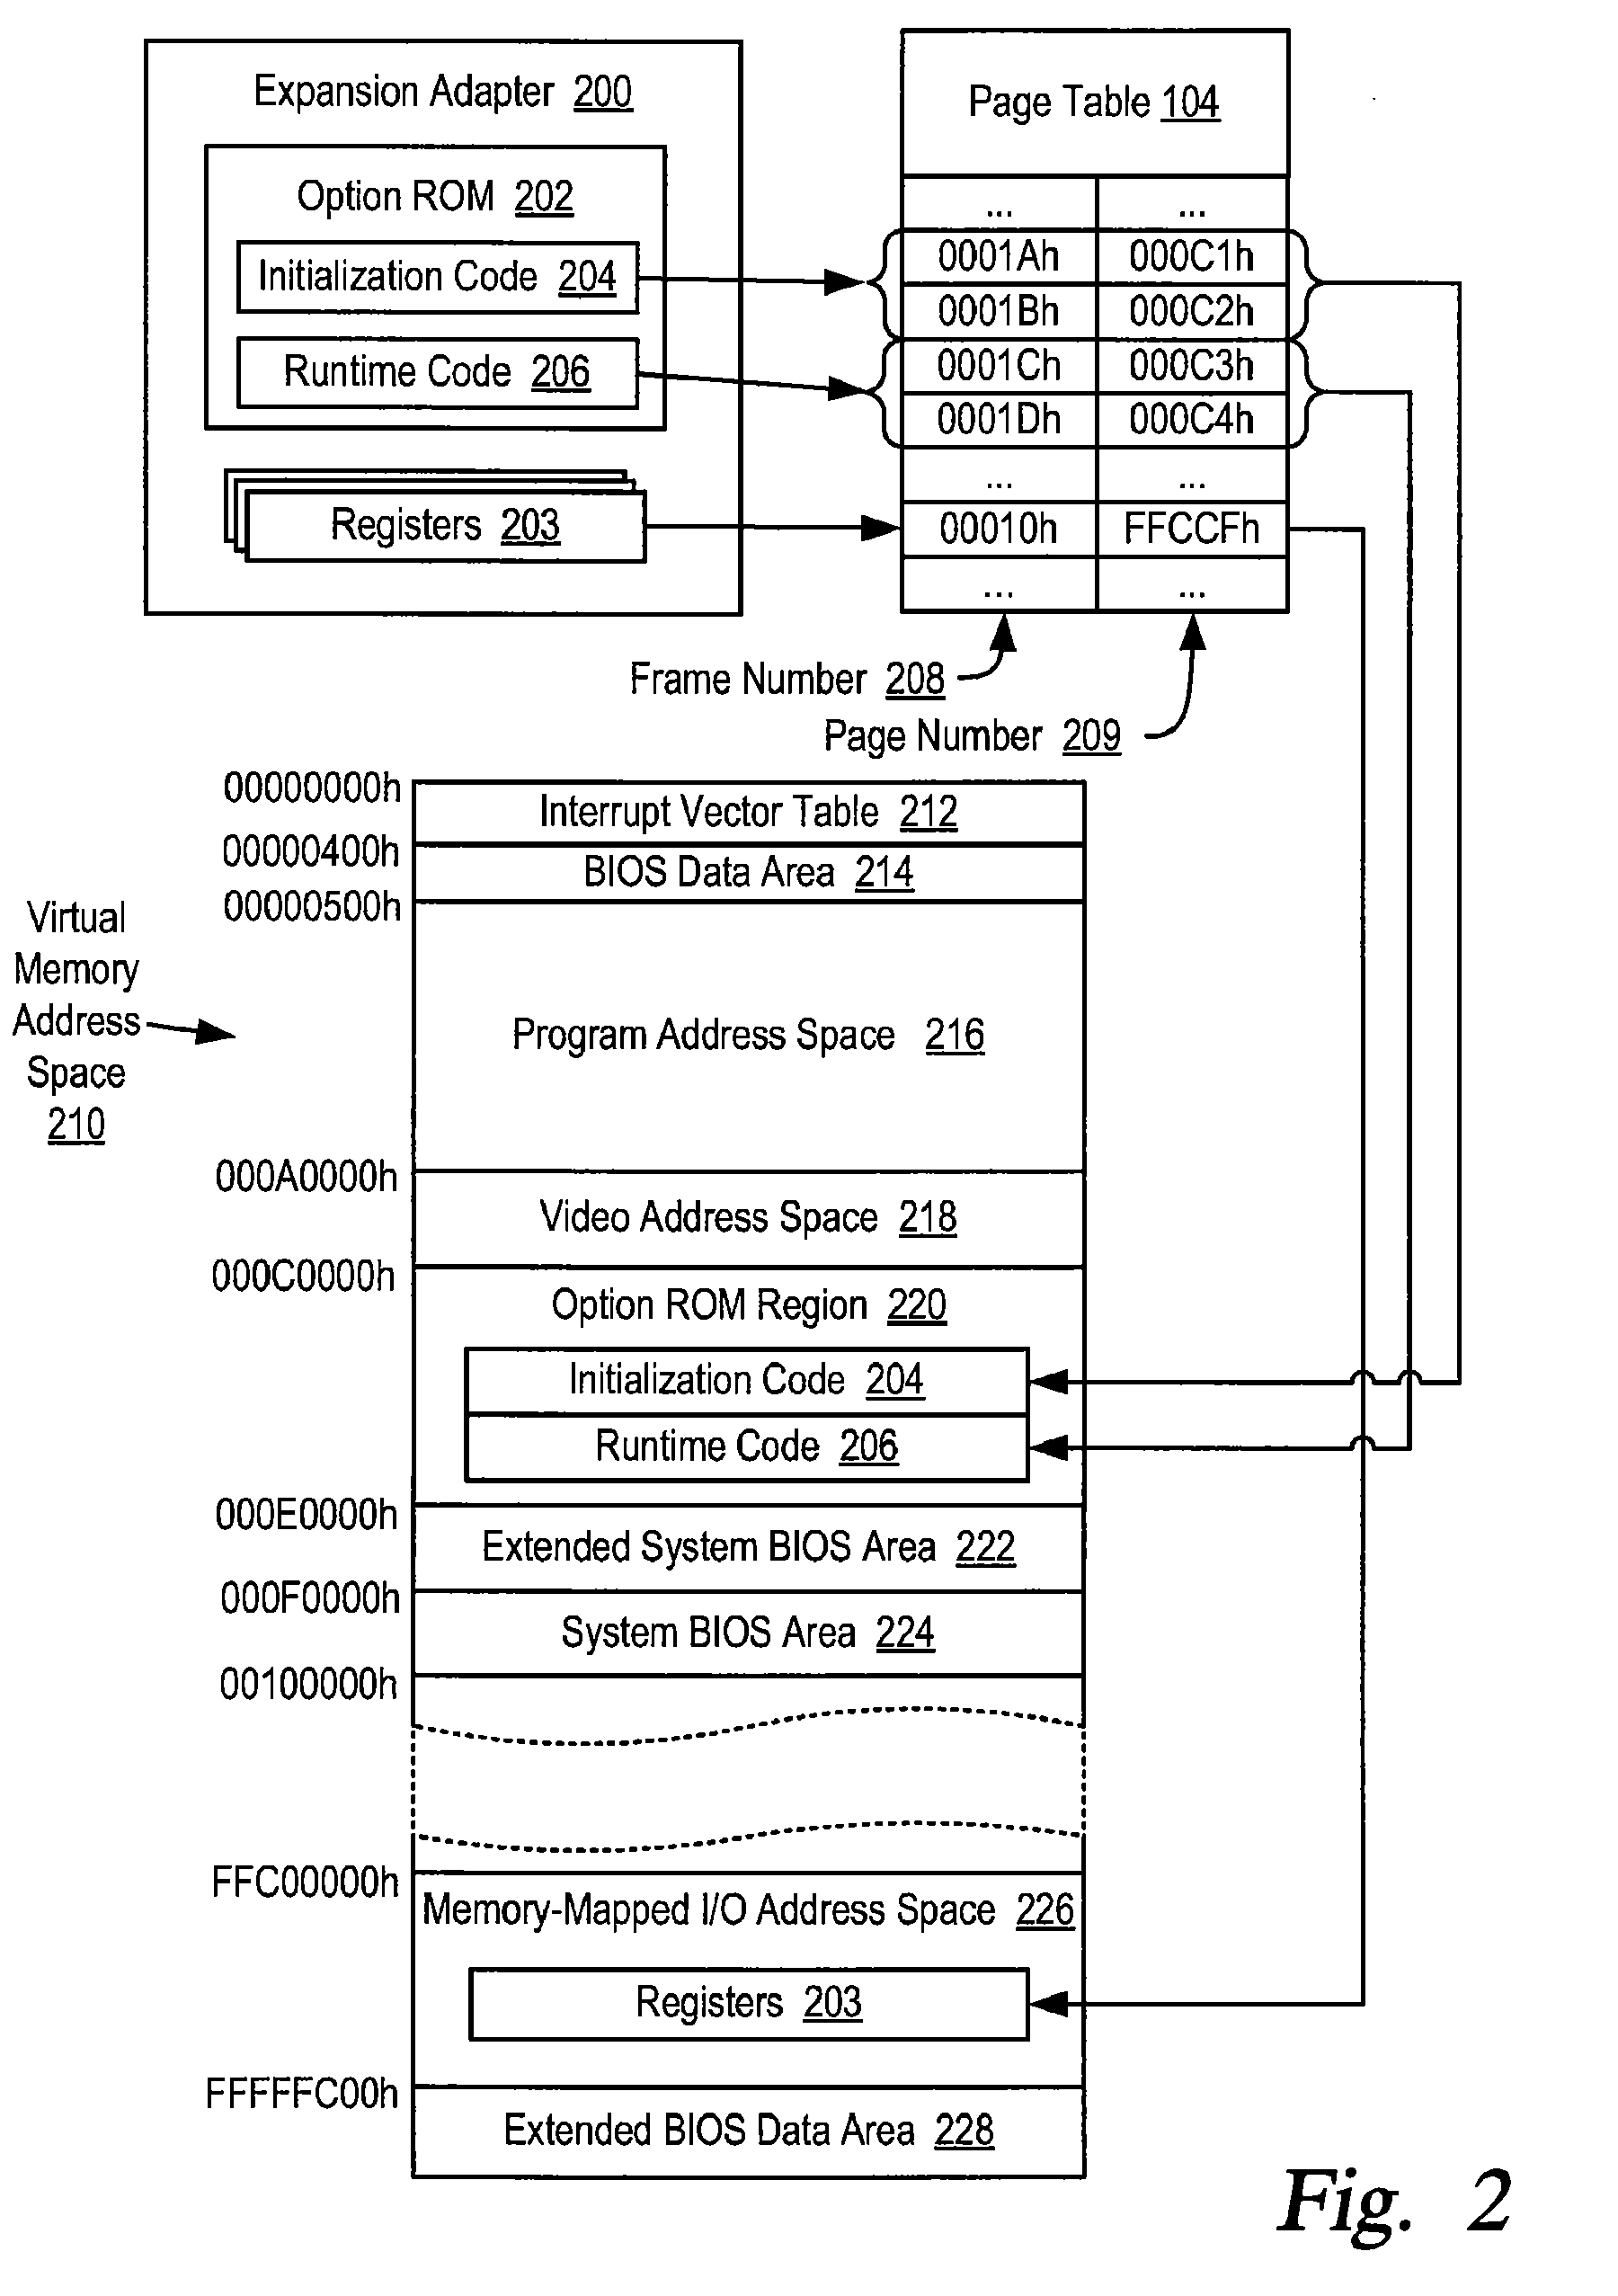 Structure for initializing expansion adpaters installed in a computer system having similar expansion adapters